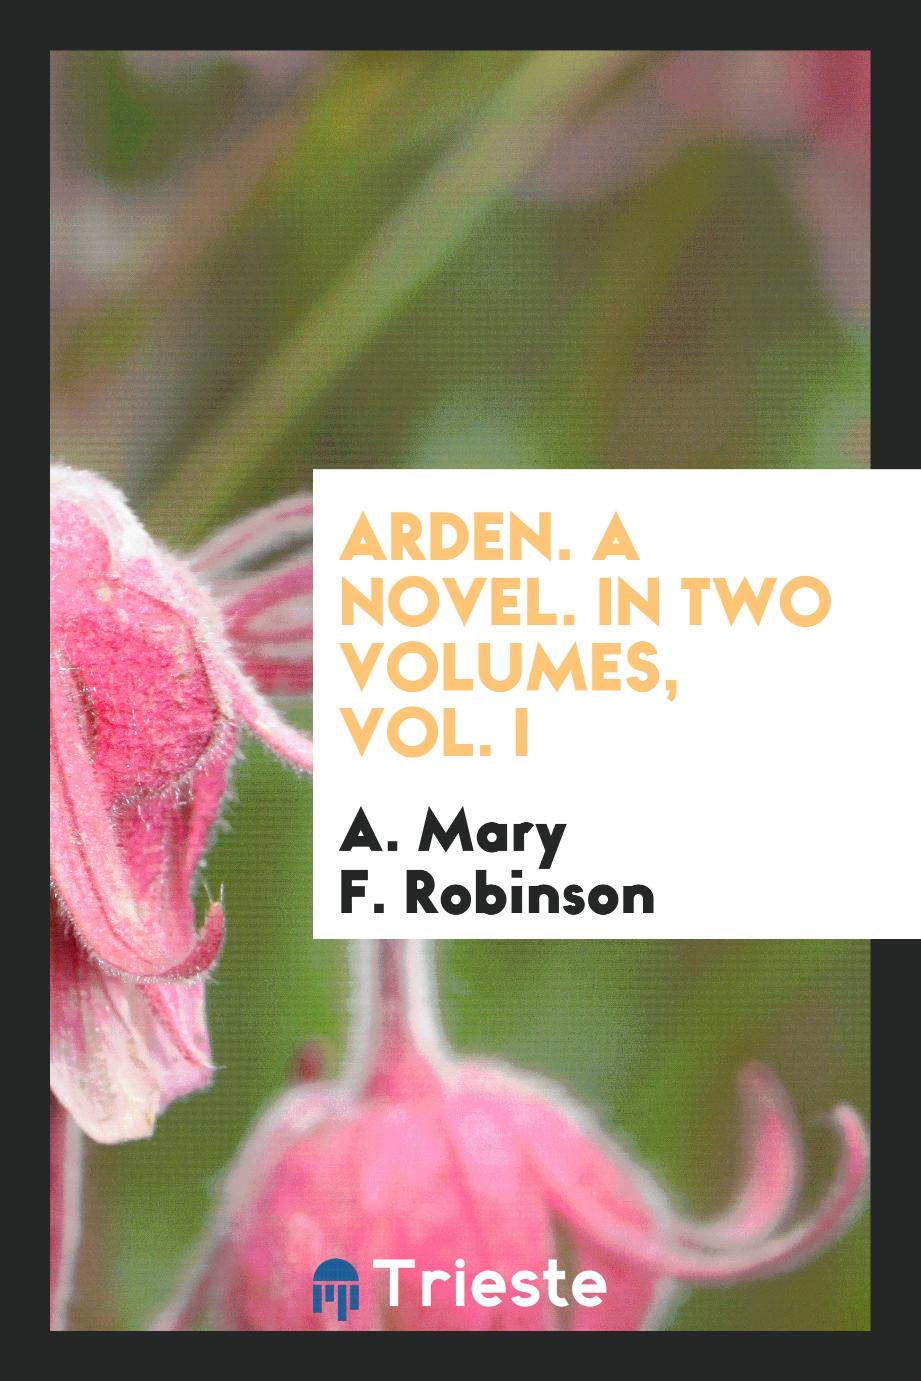 Arden. A Novel. In Two Volumes, Vol. I